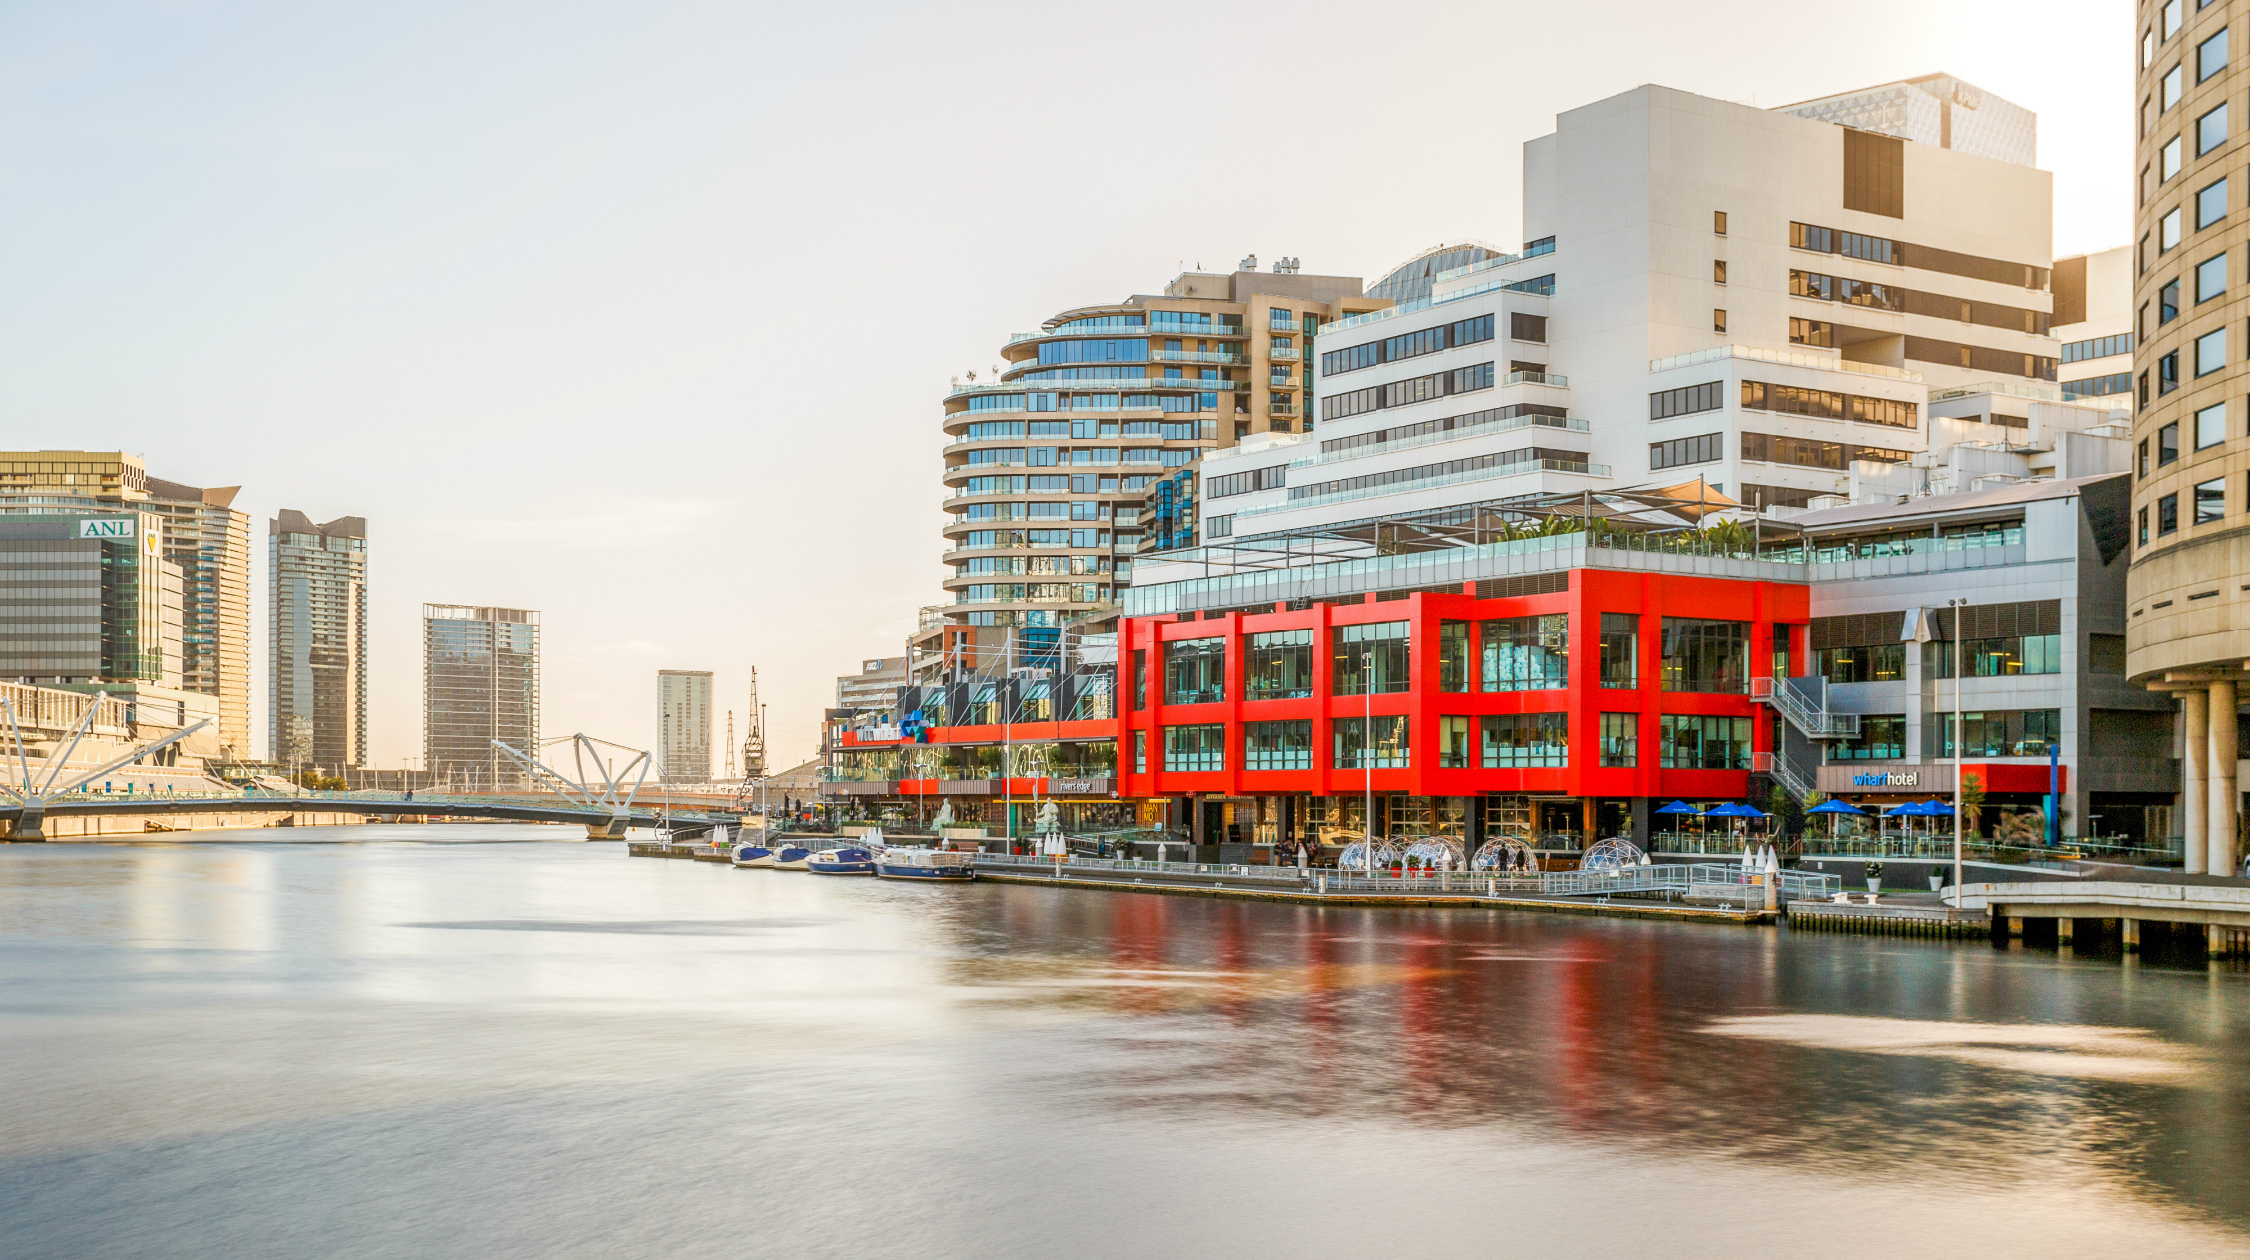 The Wharf Hotel Restaurants in Docklands, Melbourne